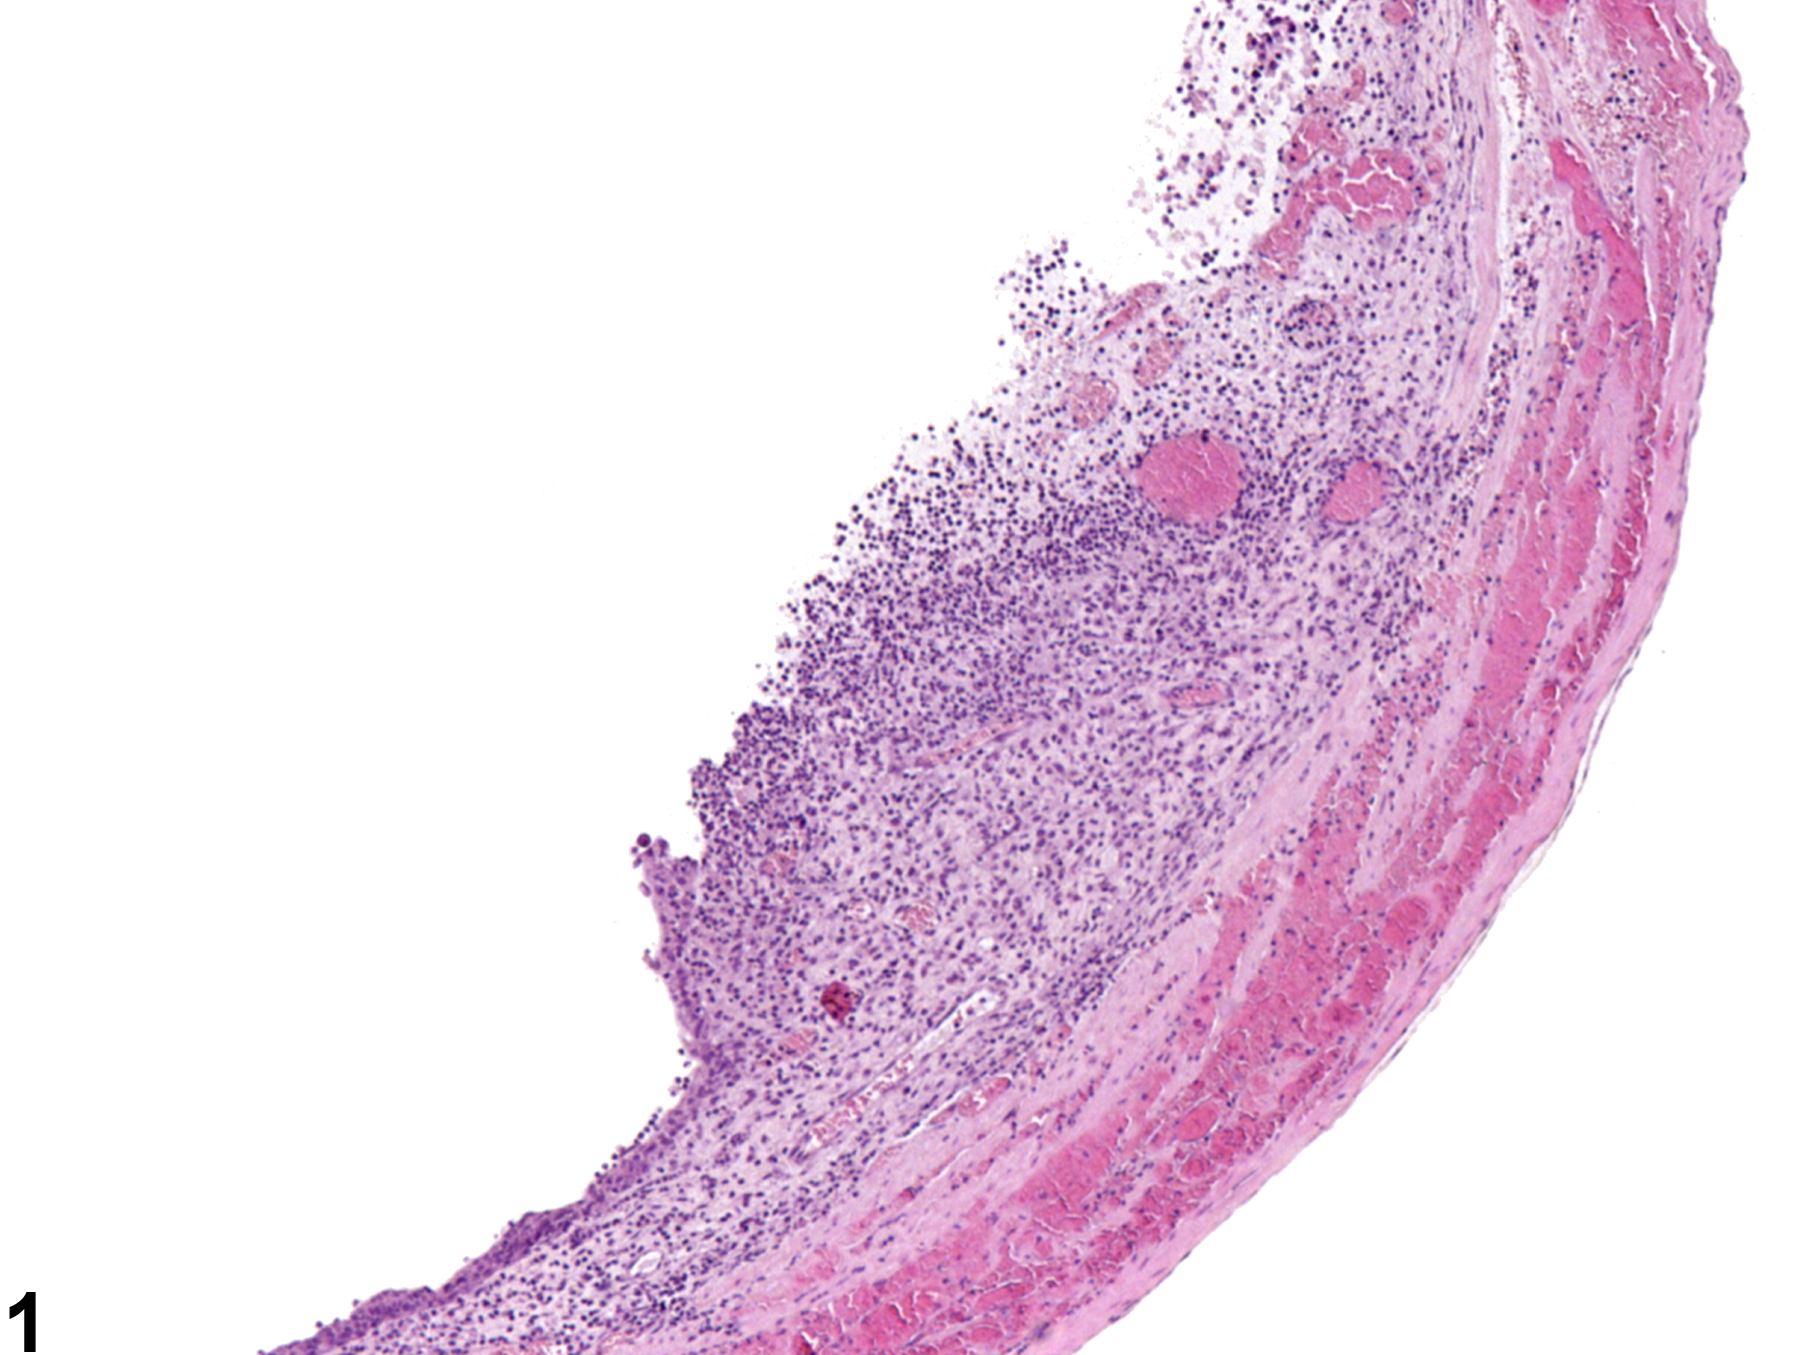 Image of ulcer in the urinary bladder from a male B6C3F1 mouse in a chronic study